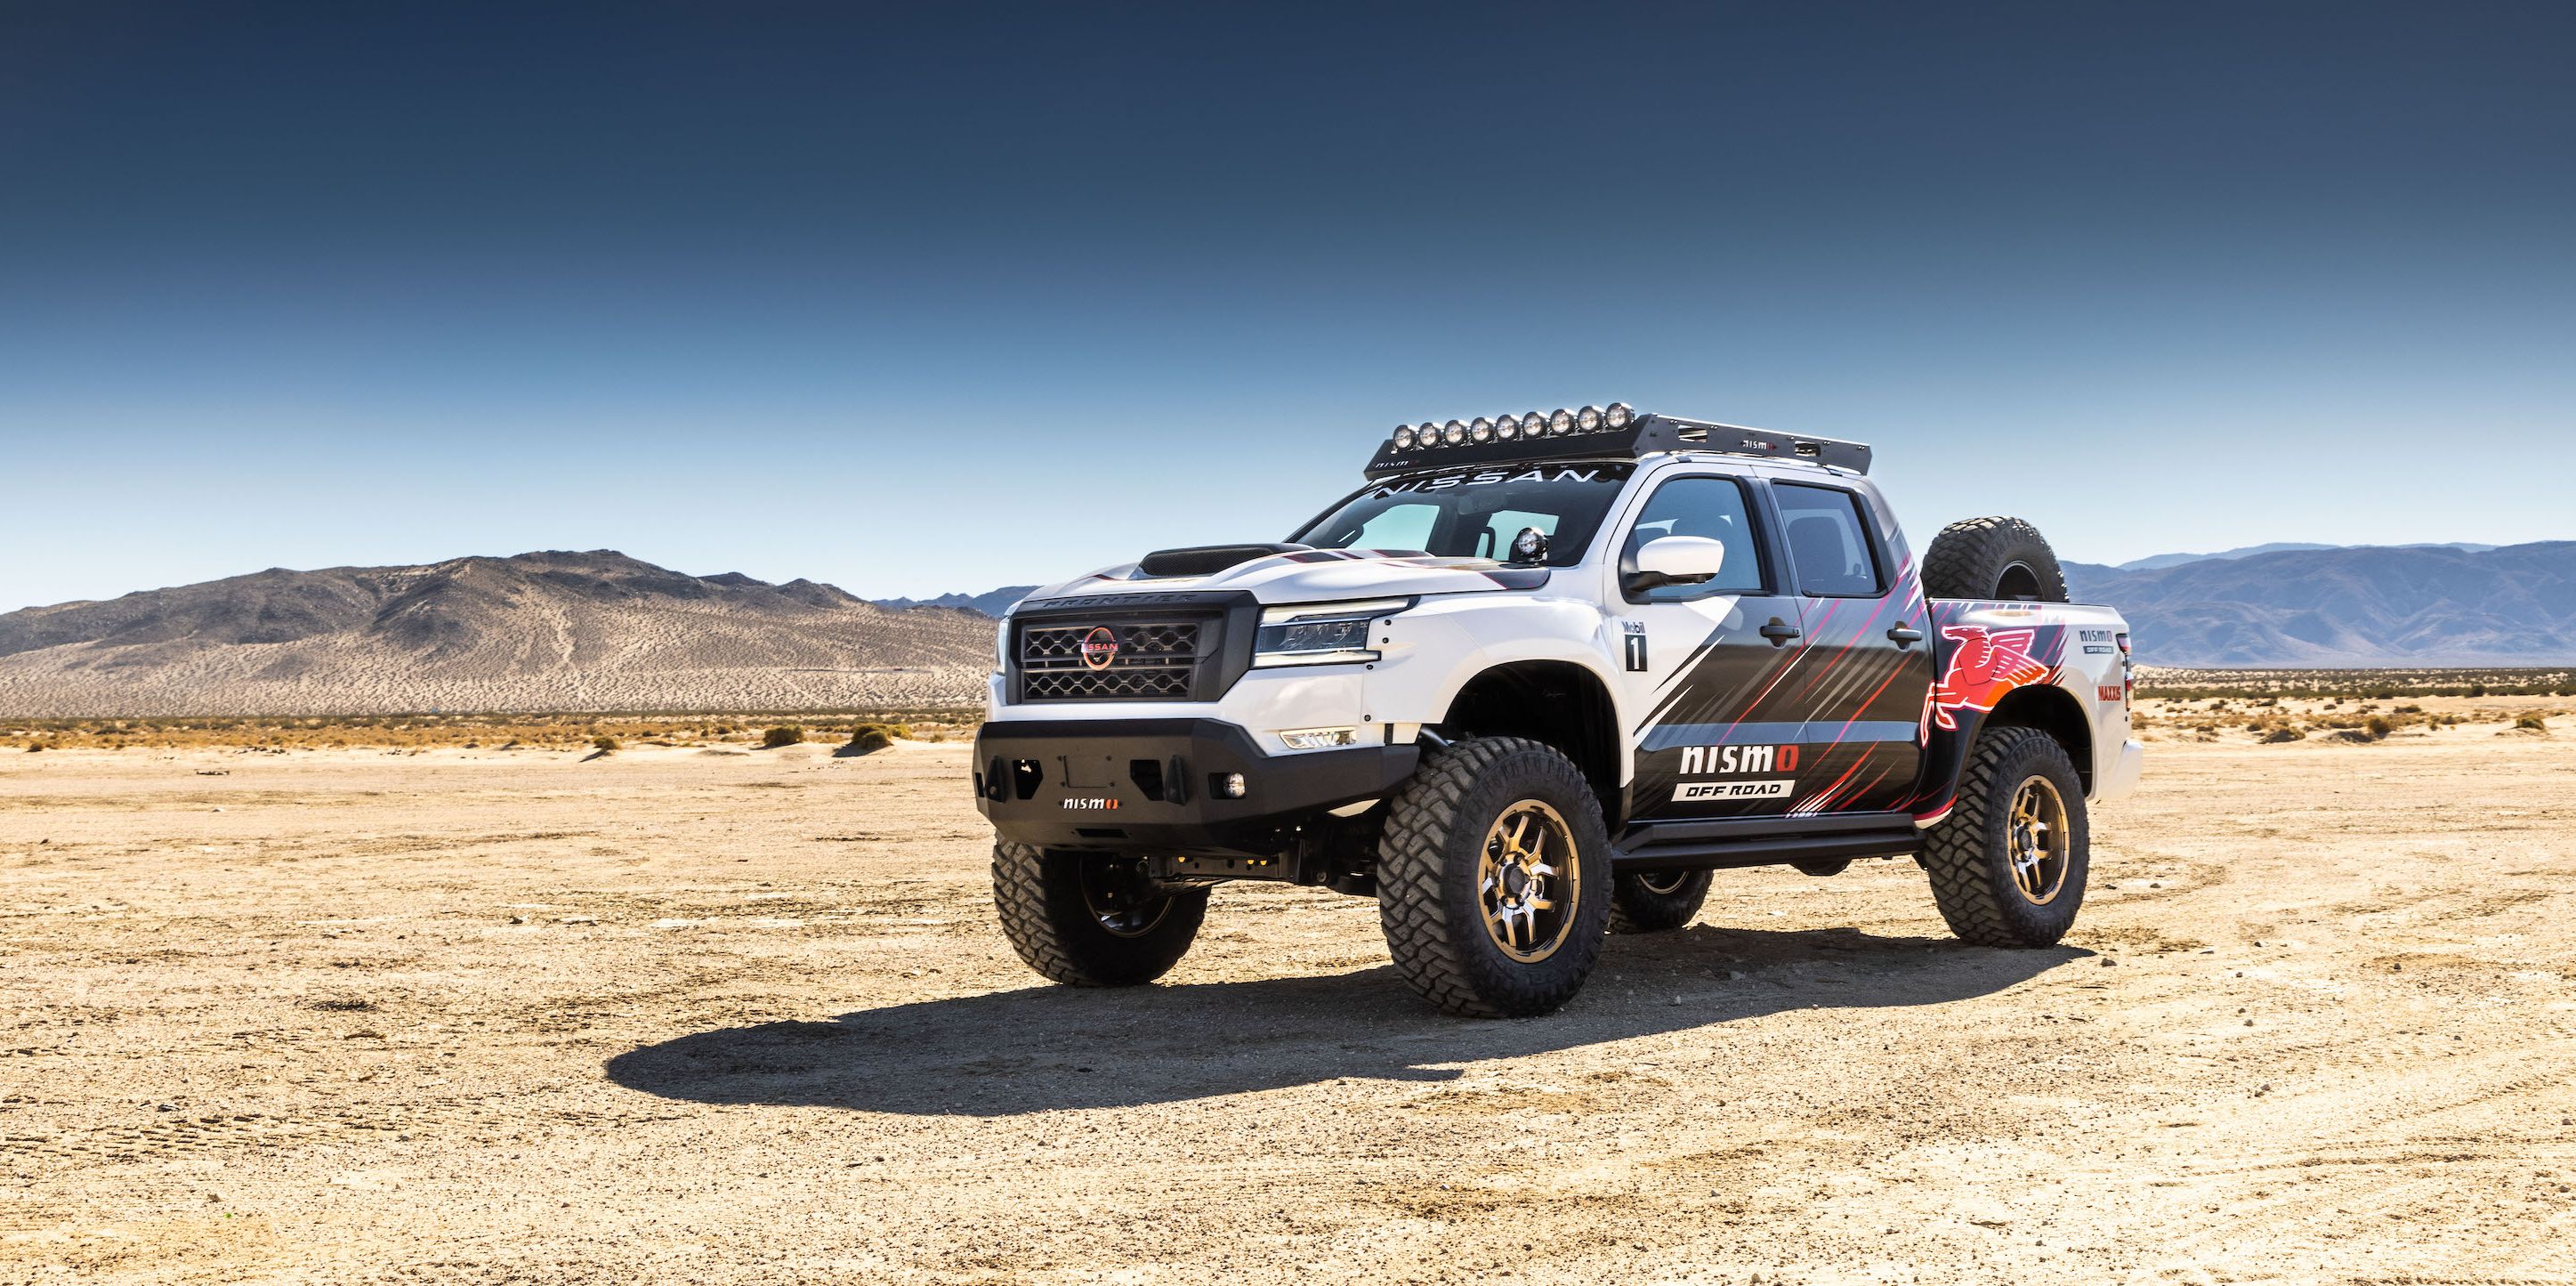 Nismo Off Road Frontier V-8 Concept - Full Image Gallery